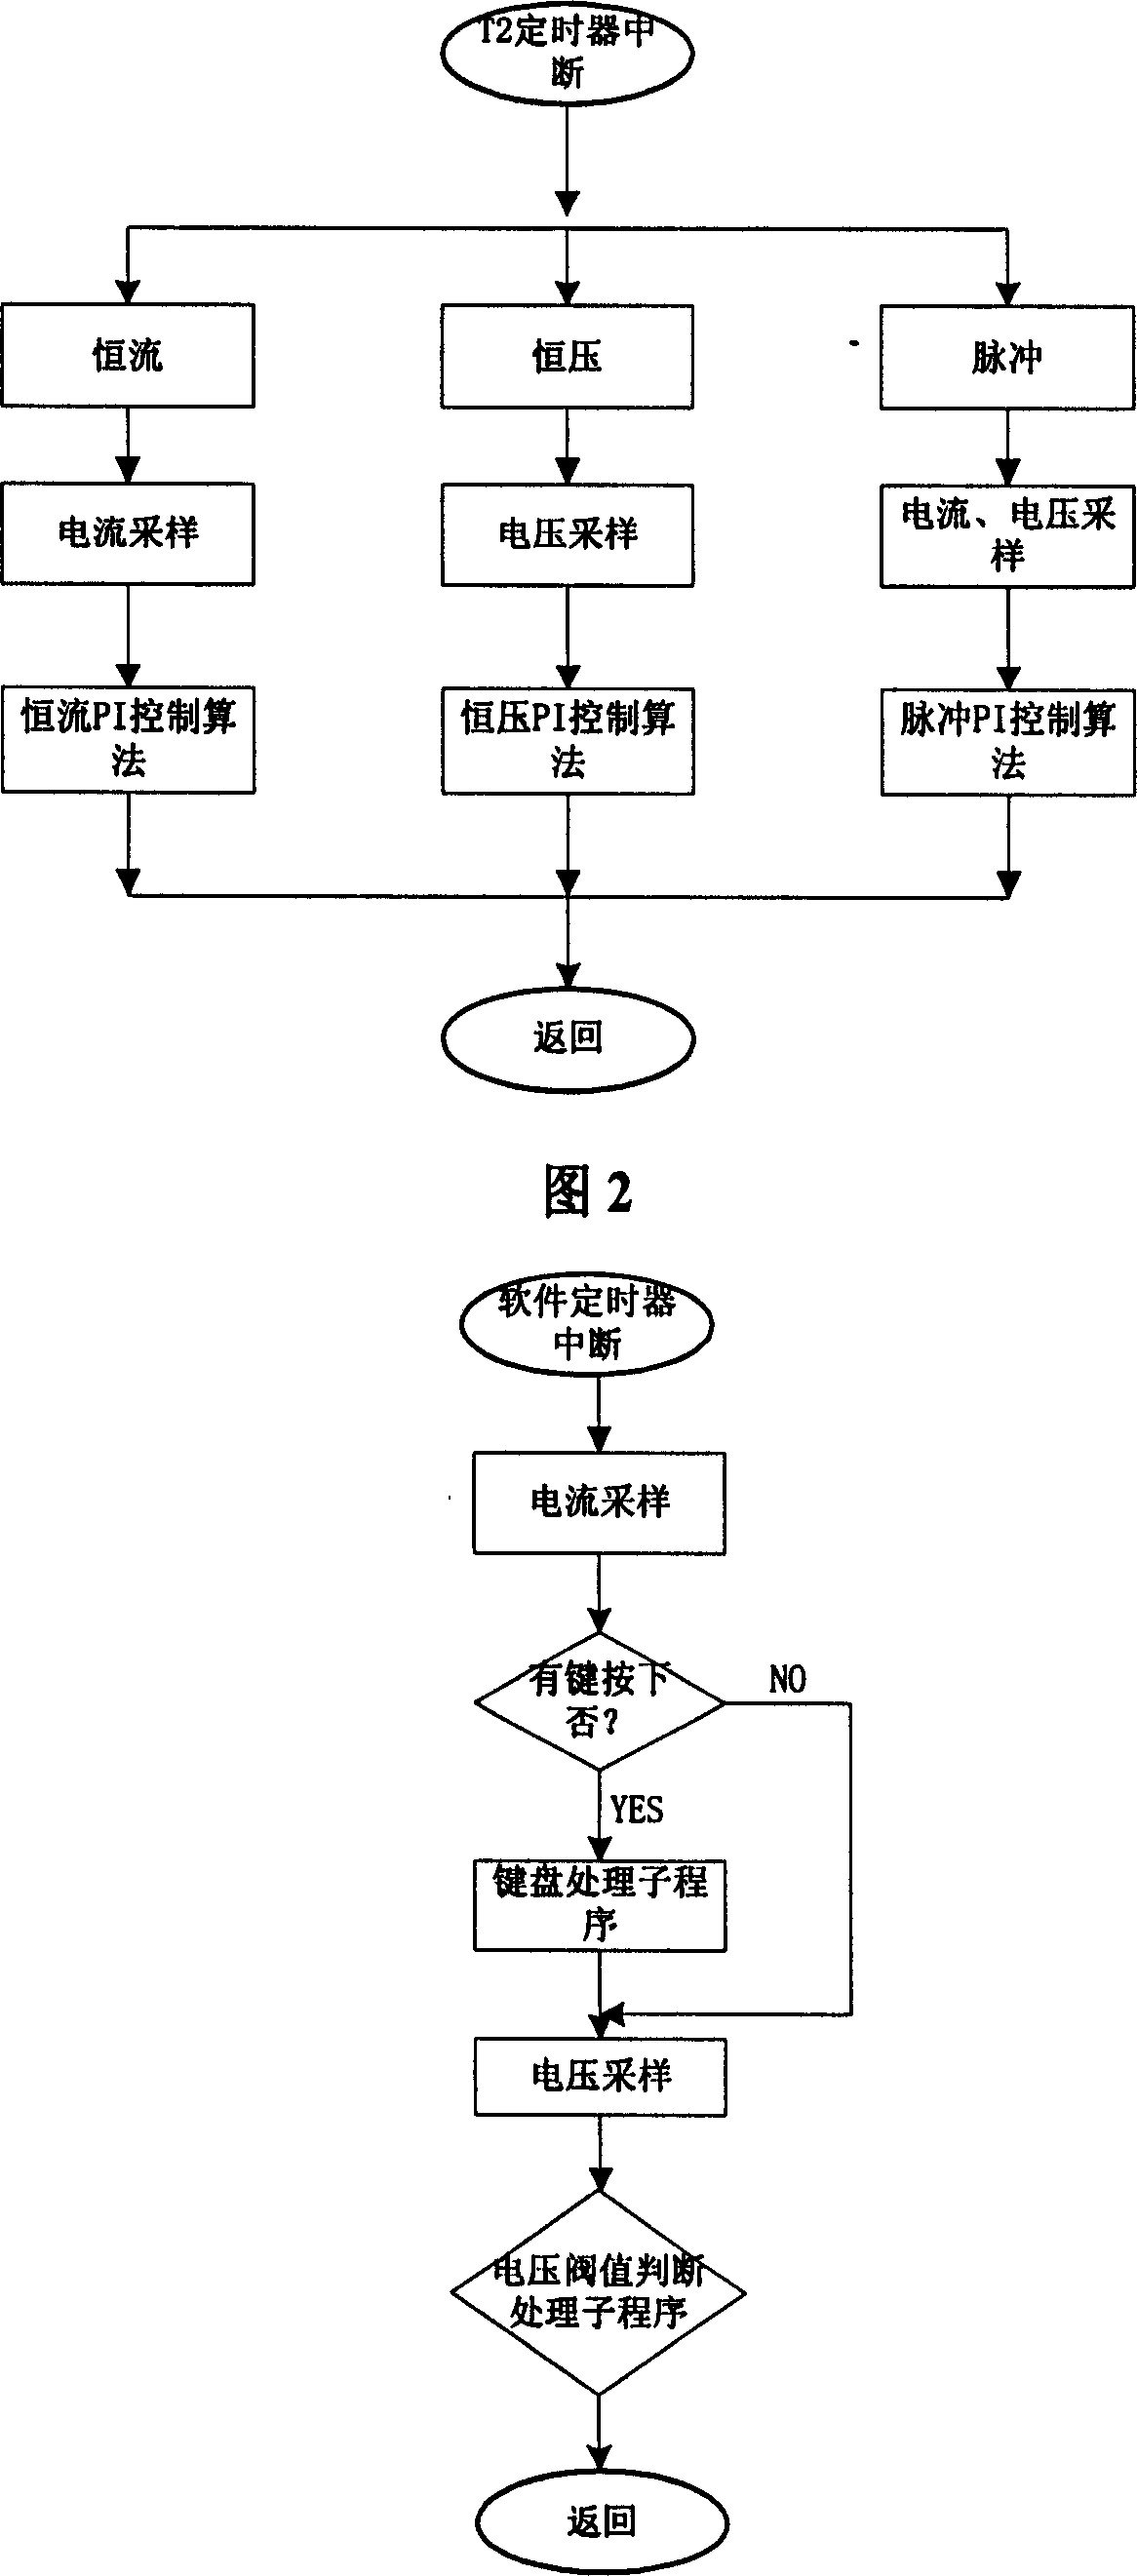 Welding machine output characteristic control method